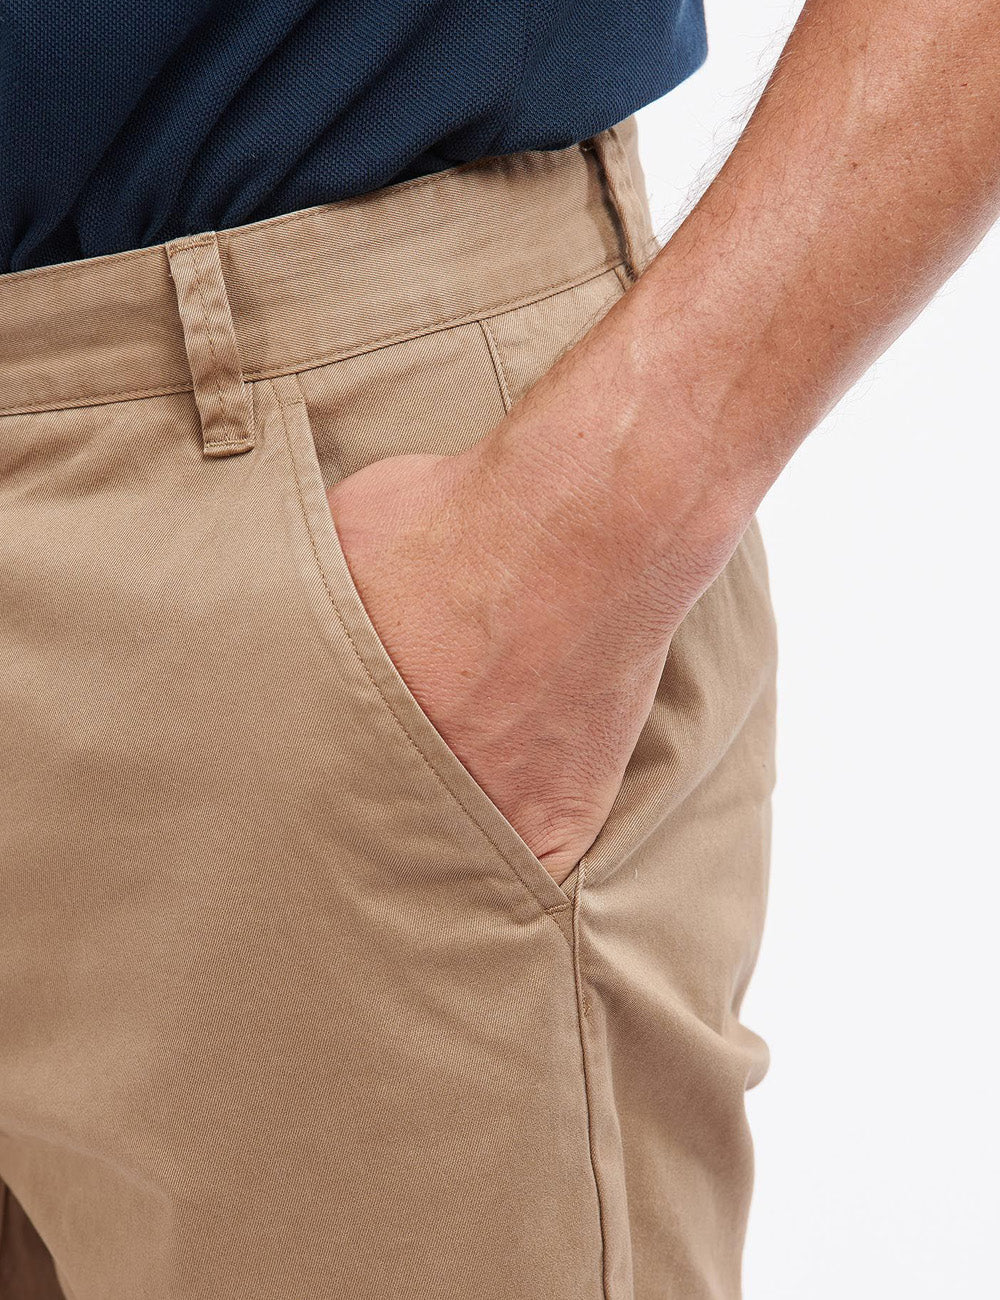 Close up of man wearing the Neuston shorts with his hand in the left pocket